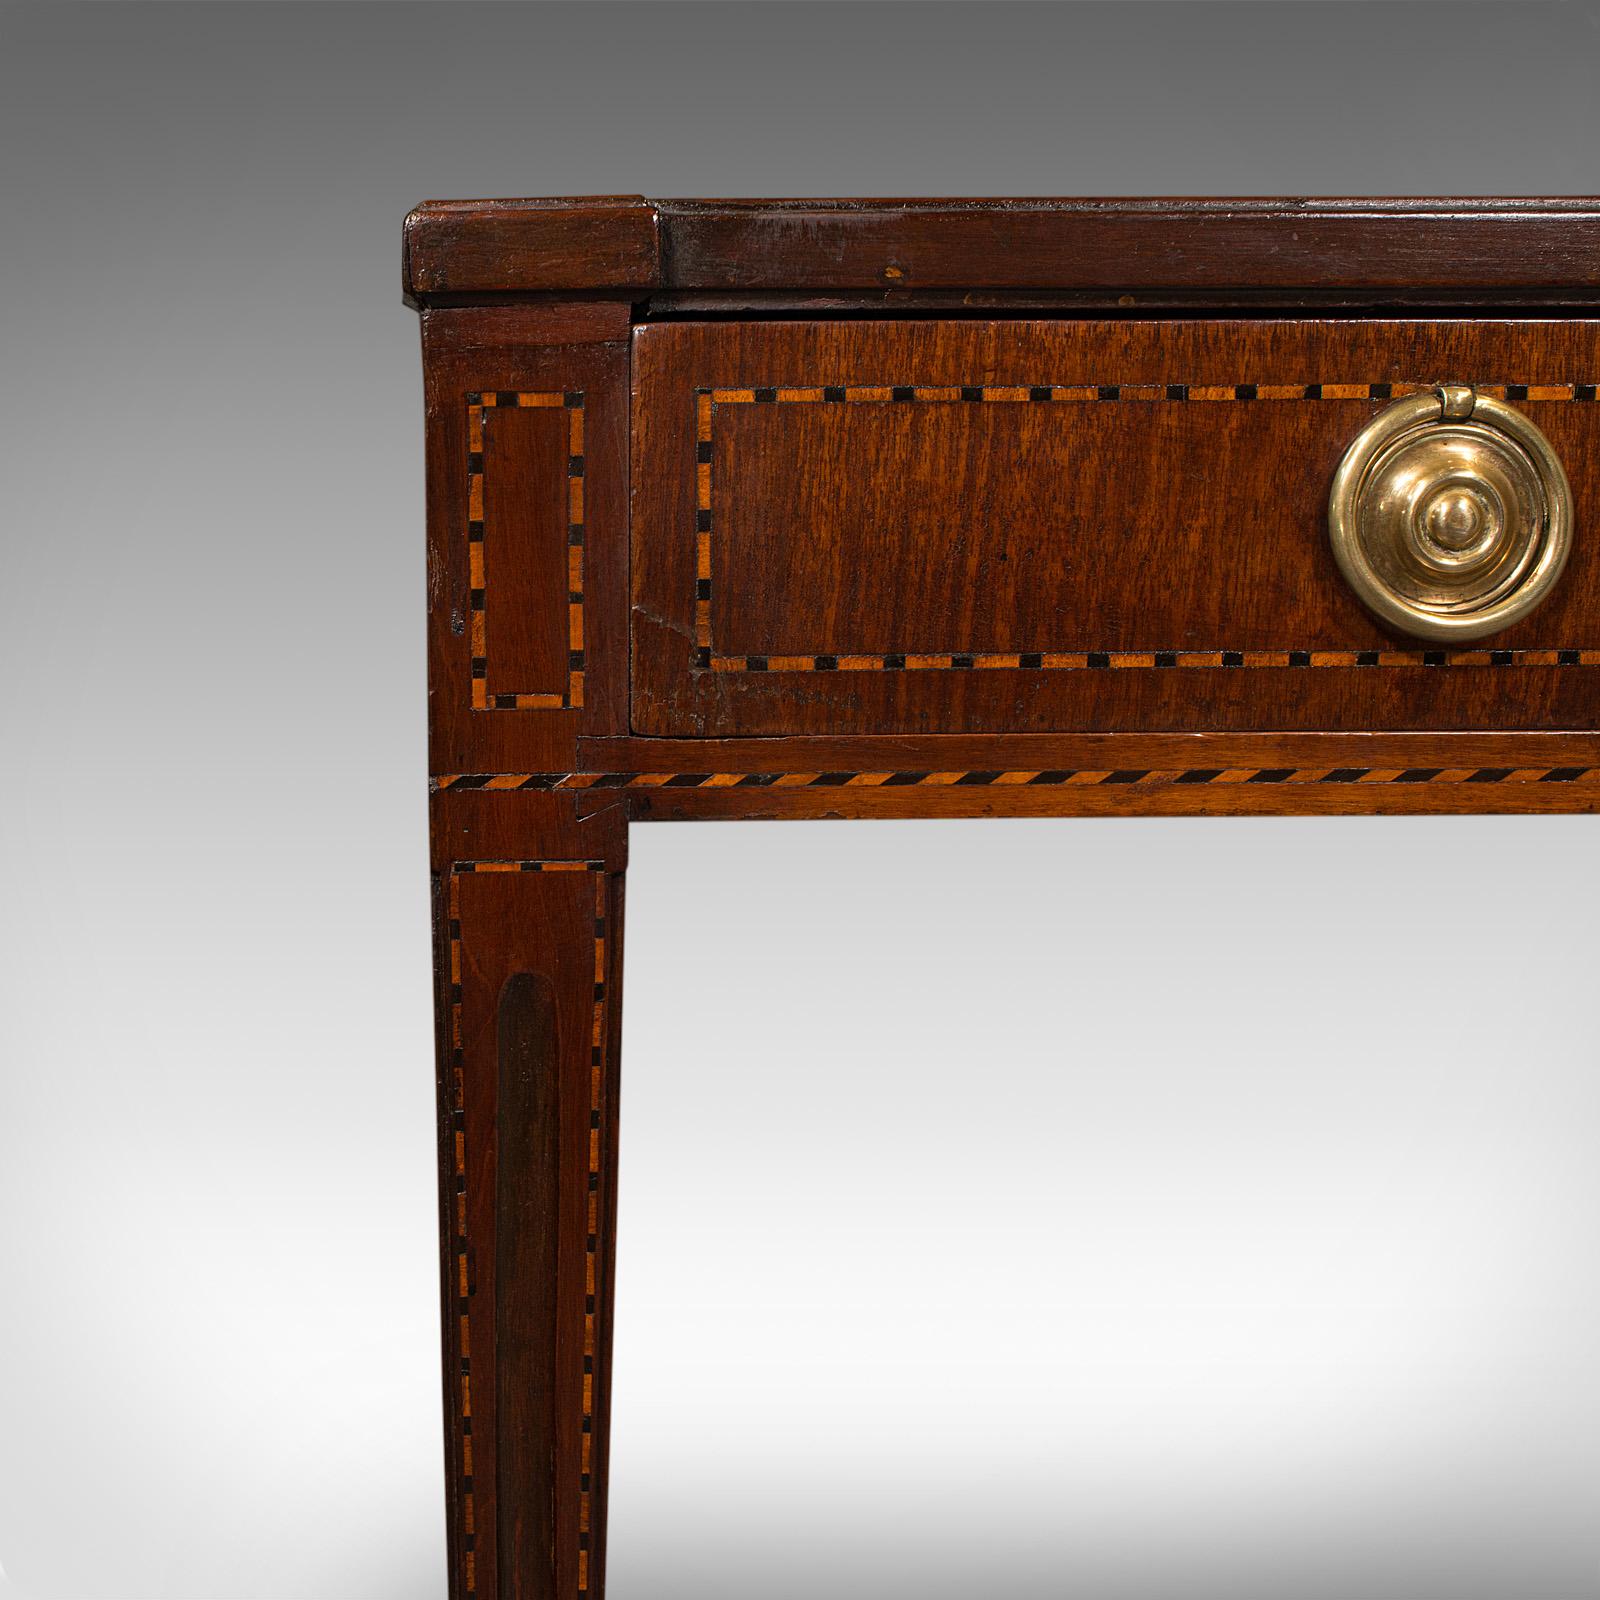 Antique Silver Table, English, Inlaid, Display, Writing Desk, Georgian, C.1780 For Sale 5